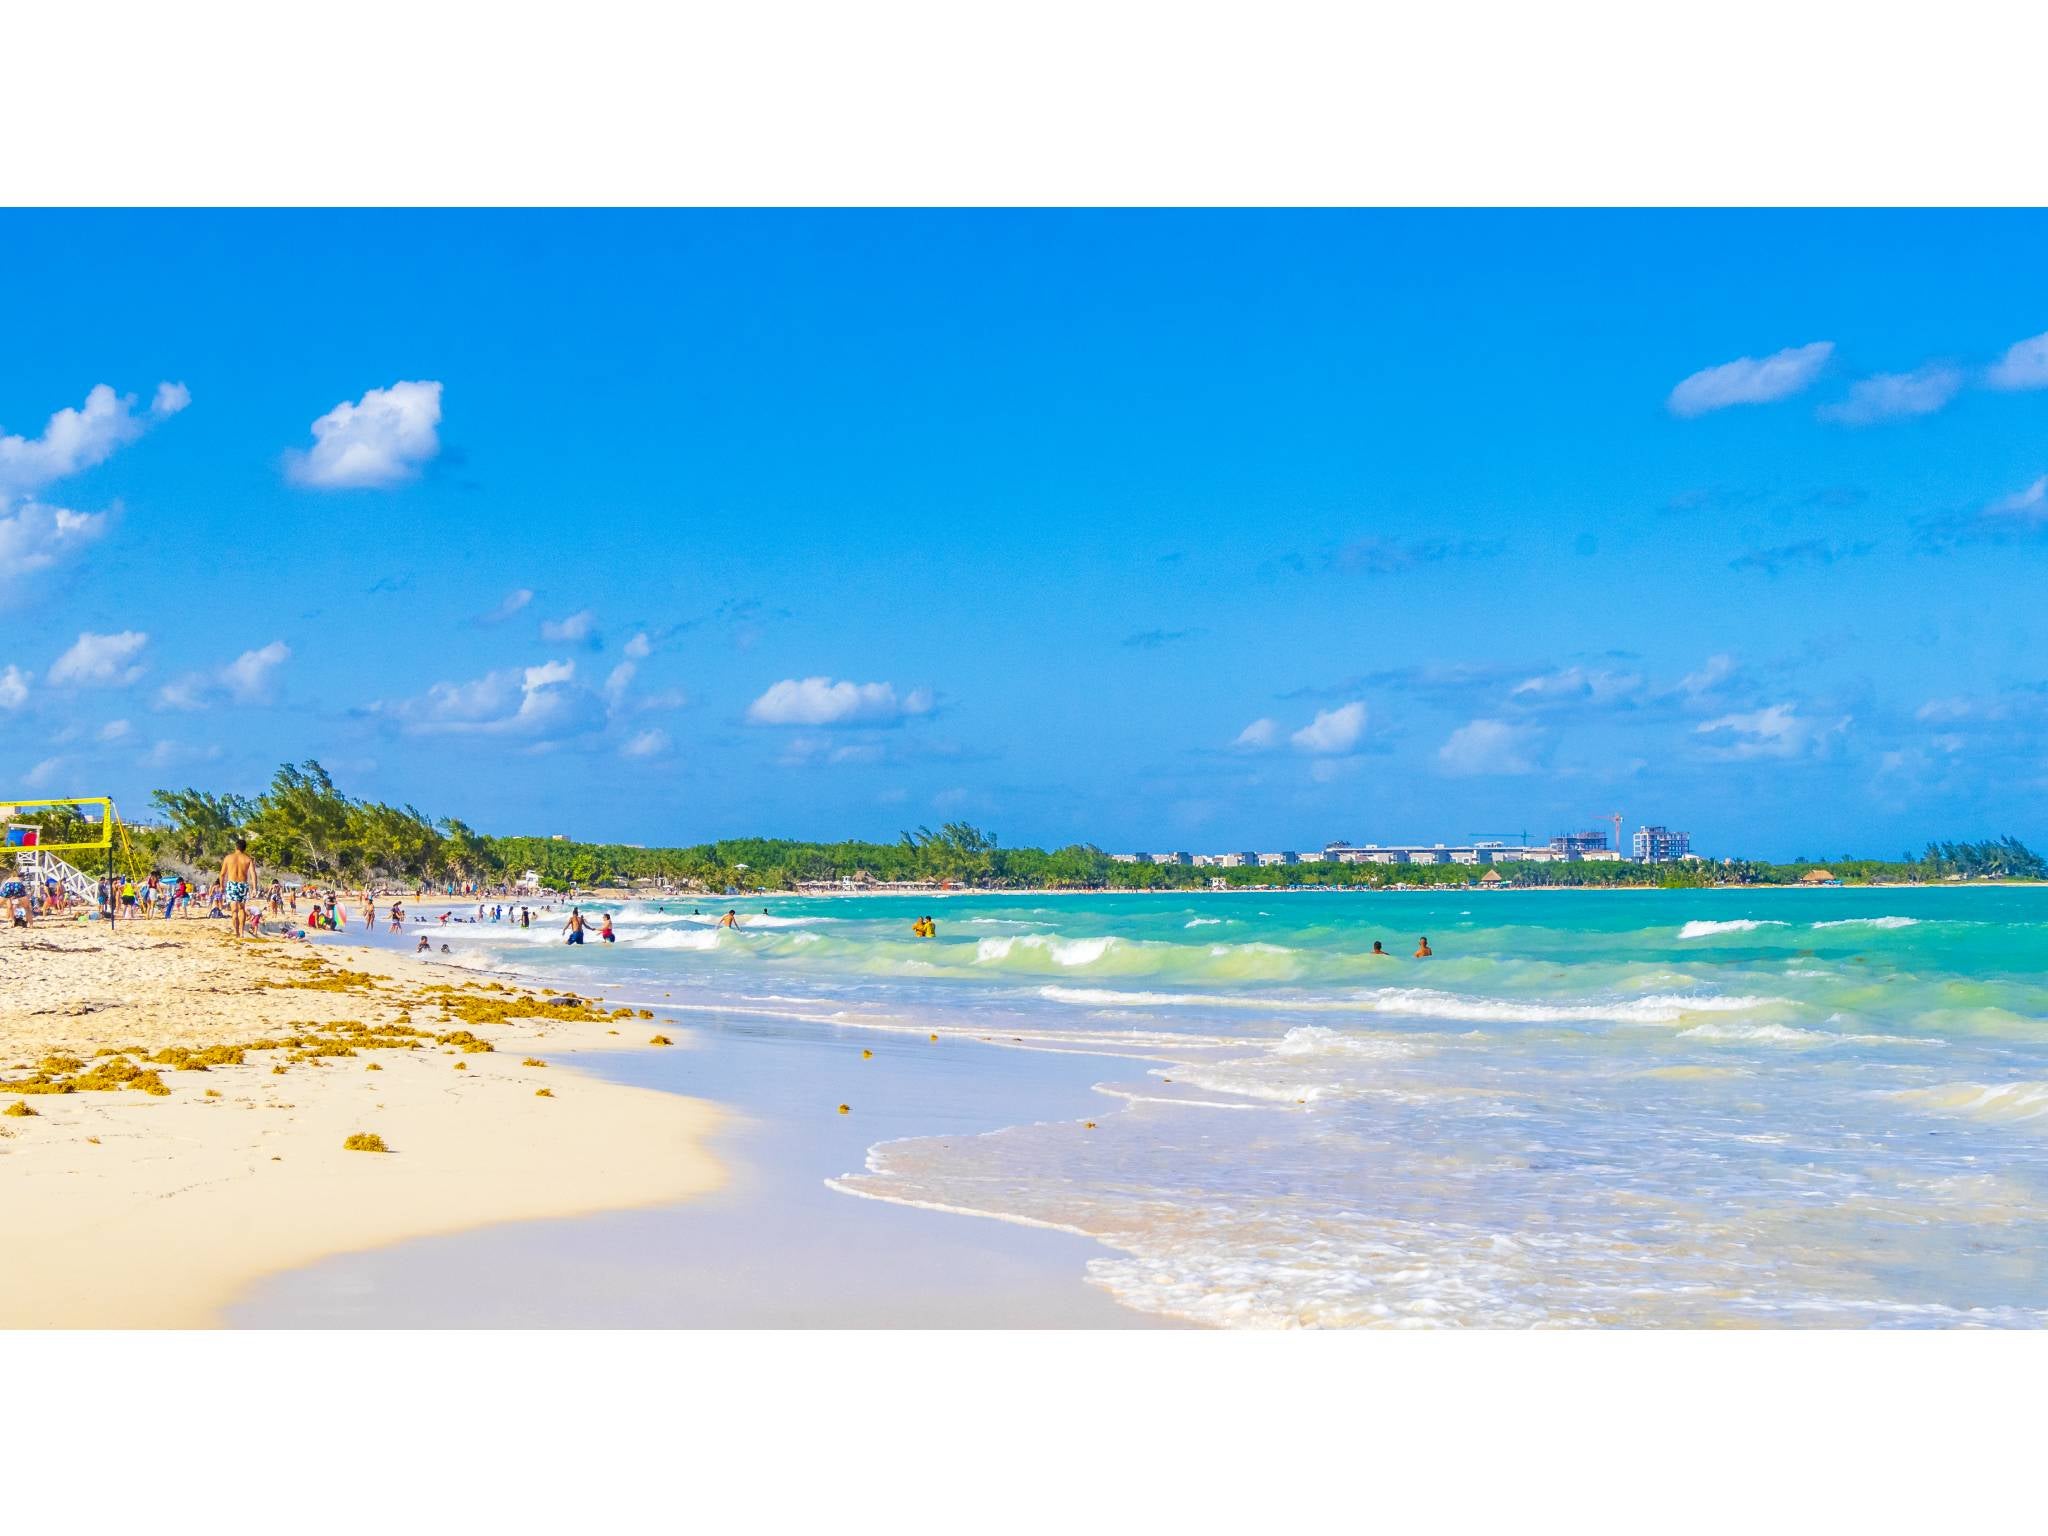 This all-inclusive holiday is close to coastal resort Playa del Carmen